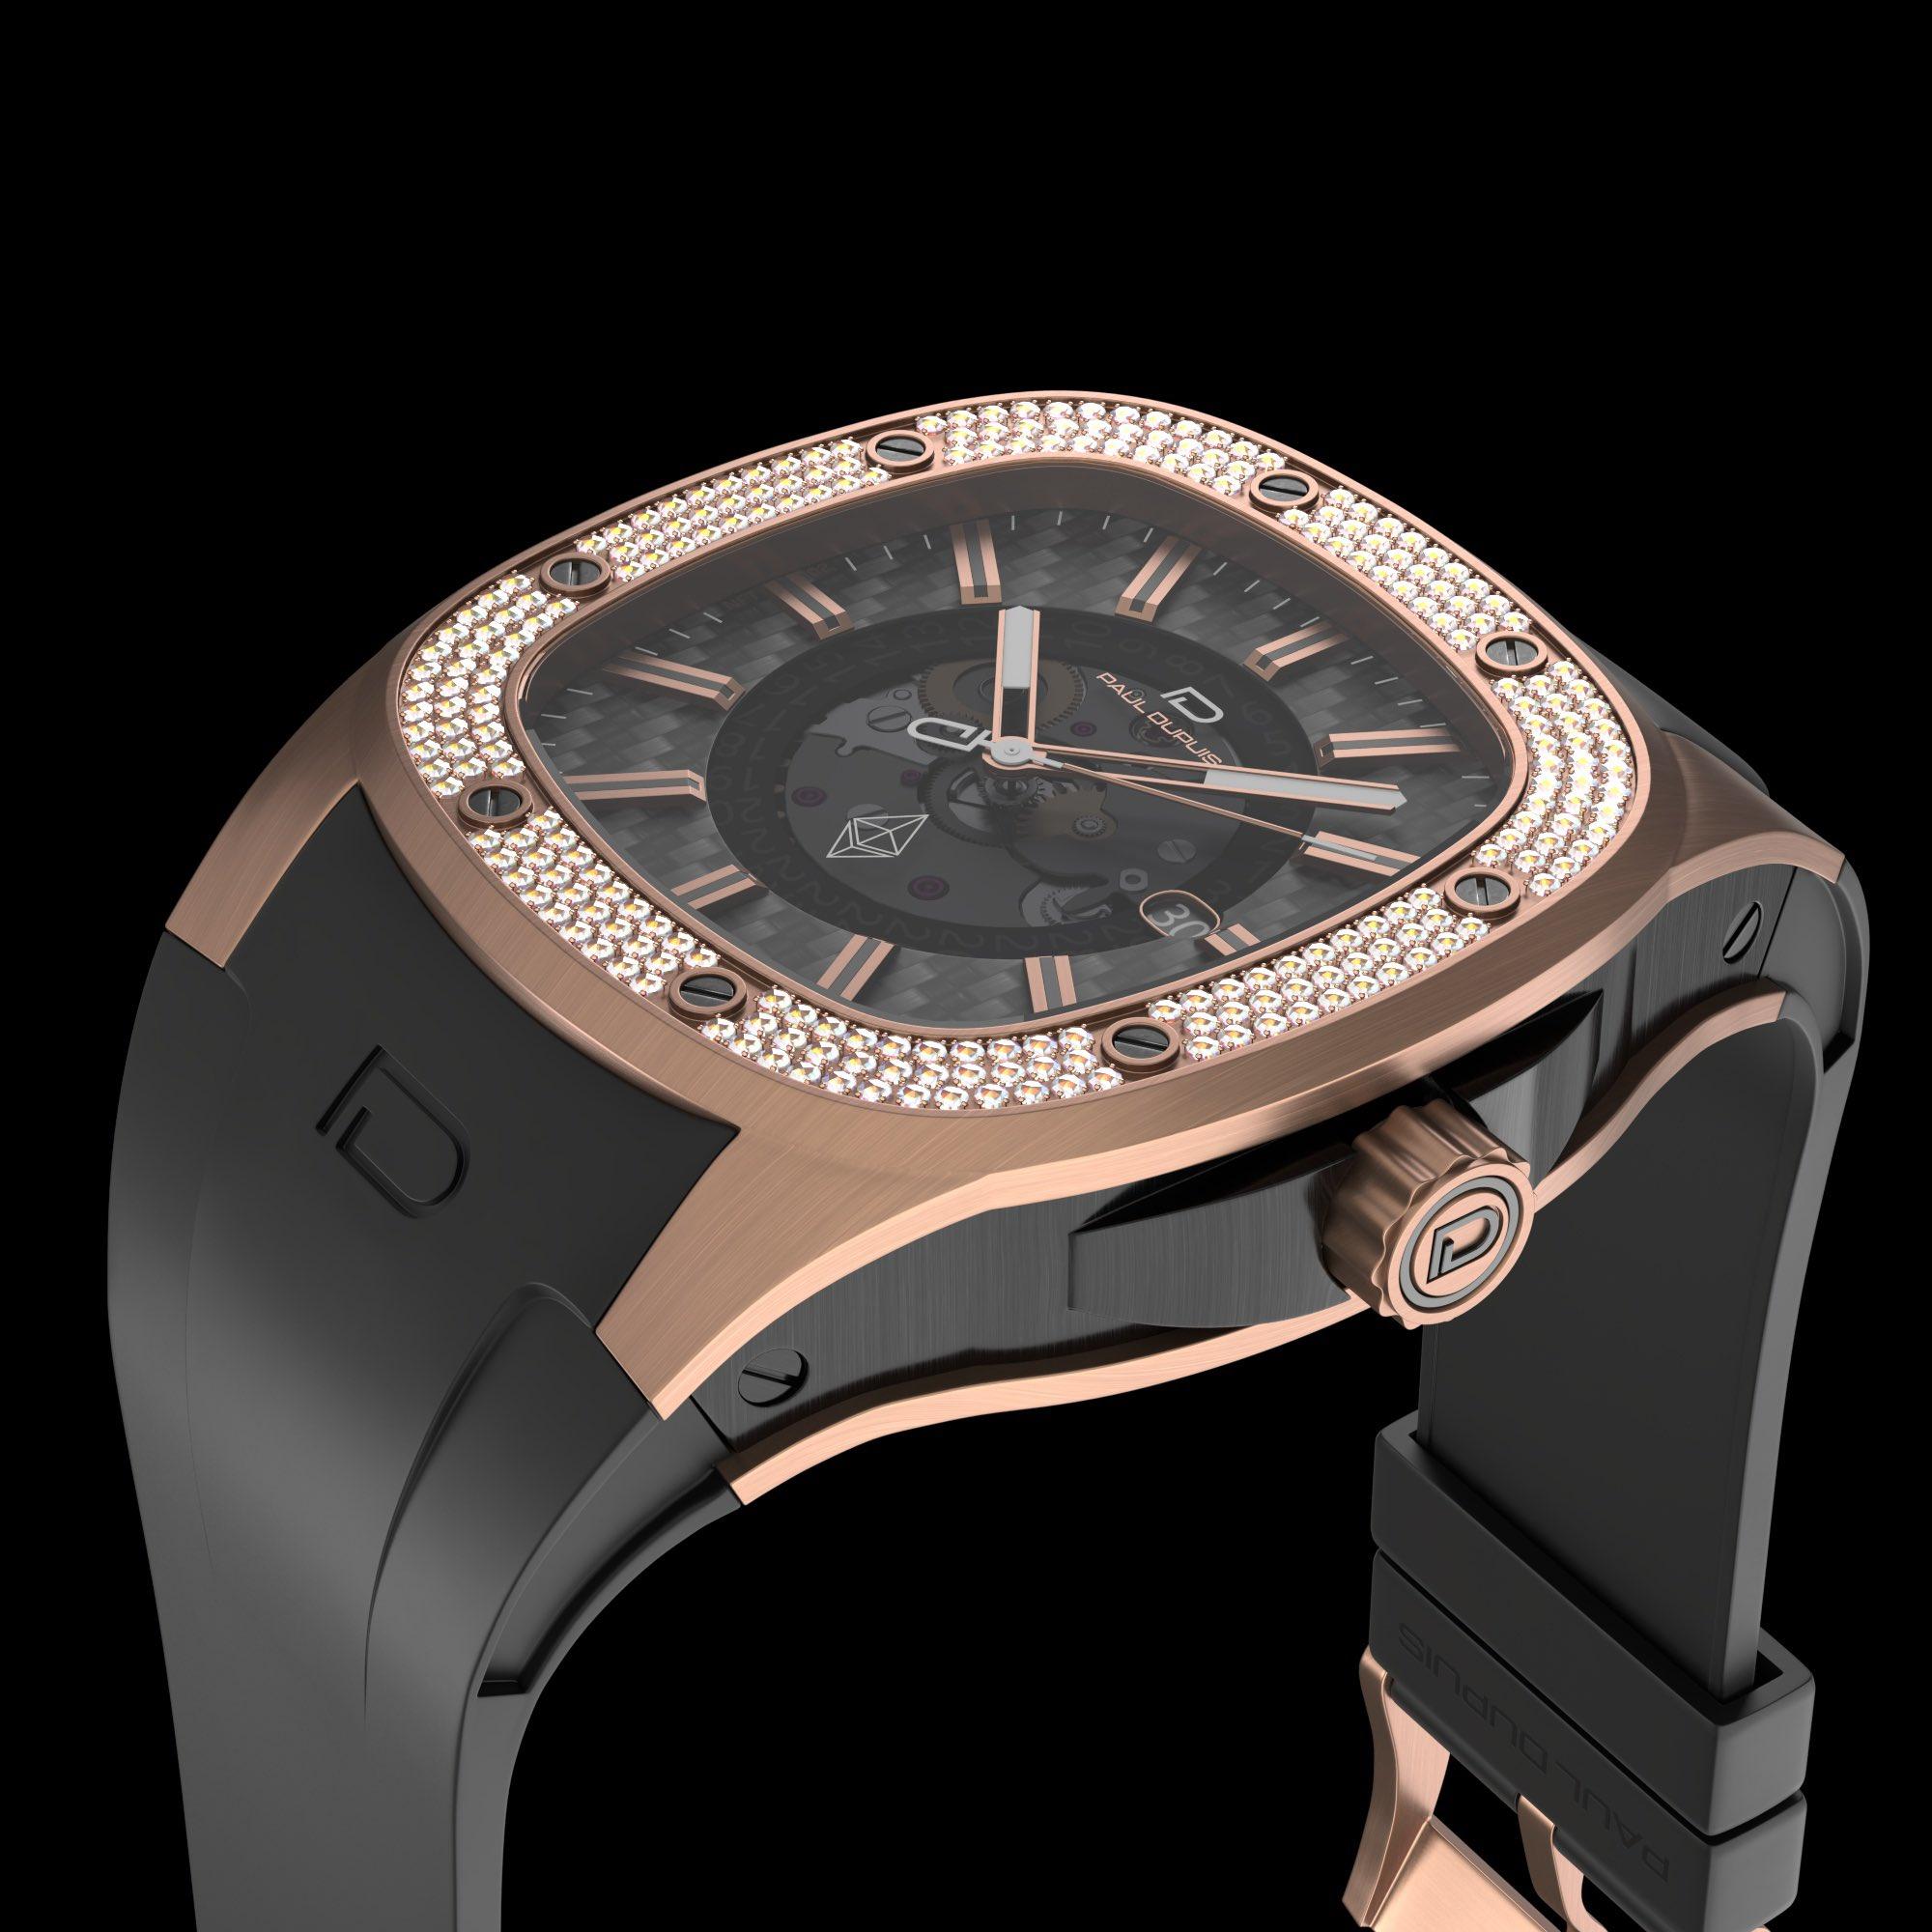 Paul Dupuis luxury watch in gold and black with diamonds